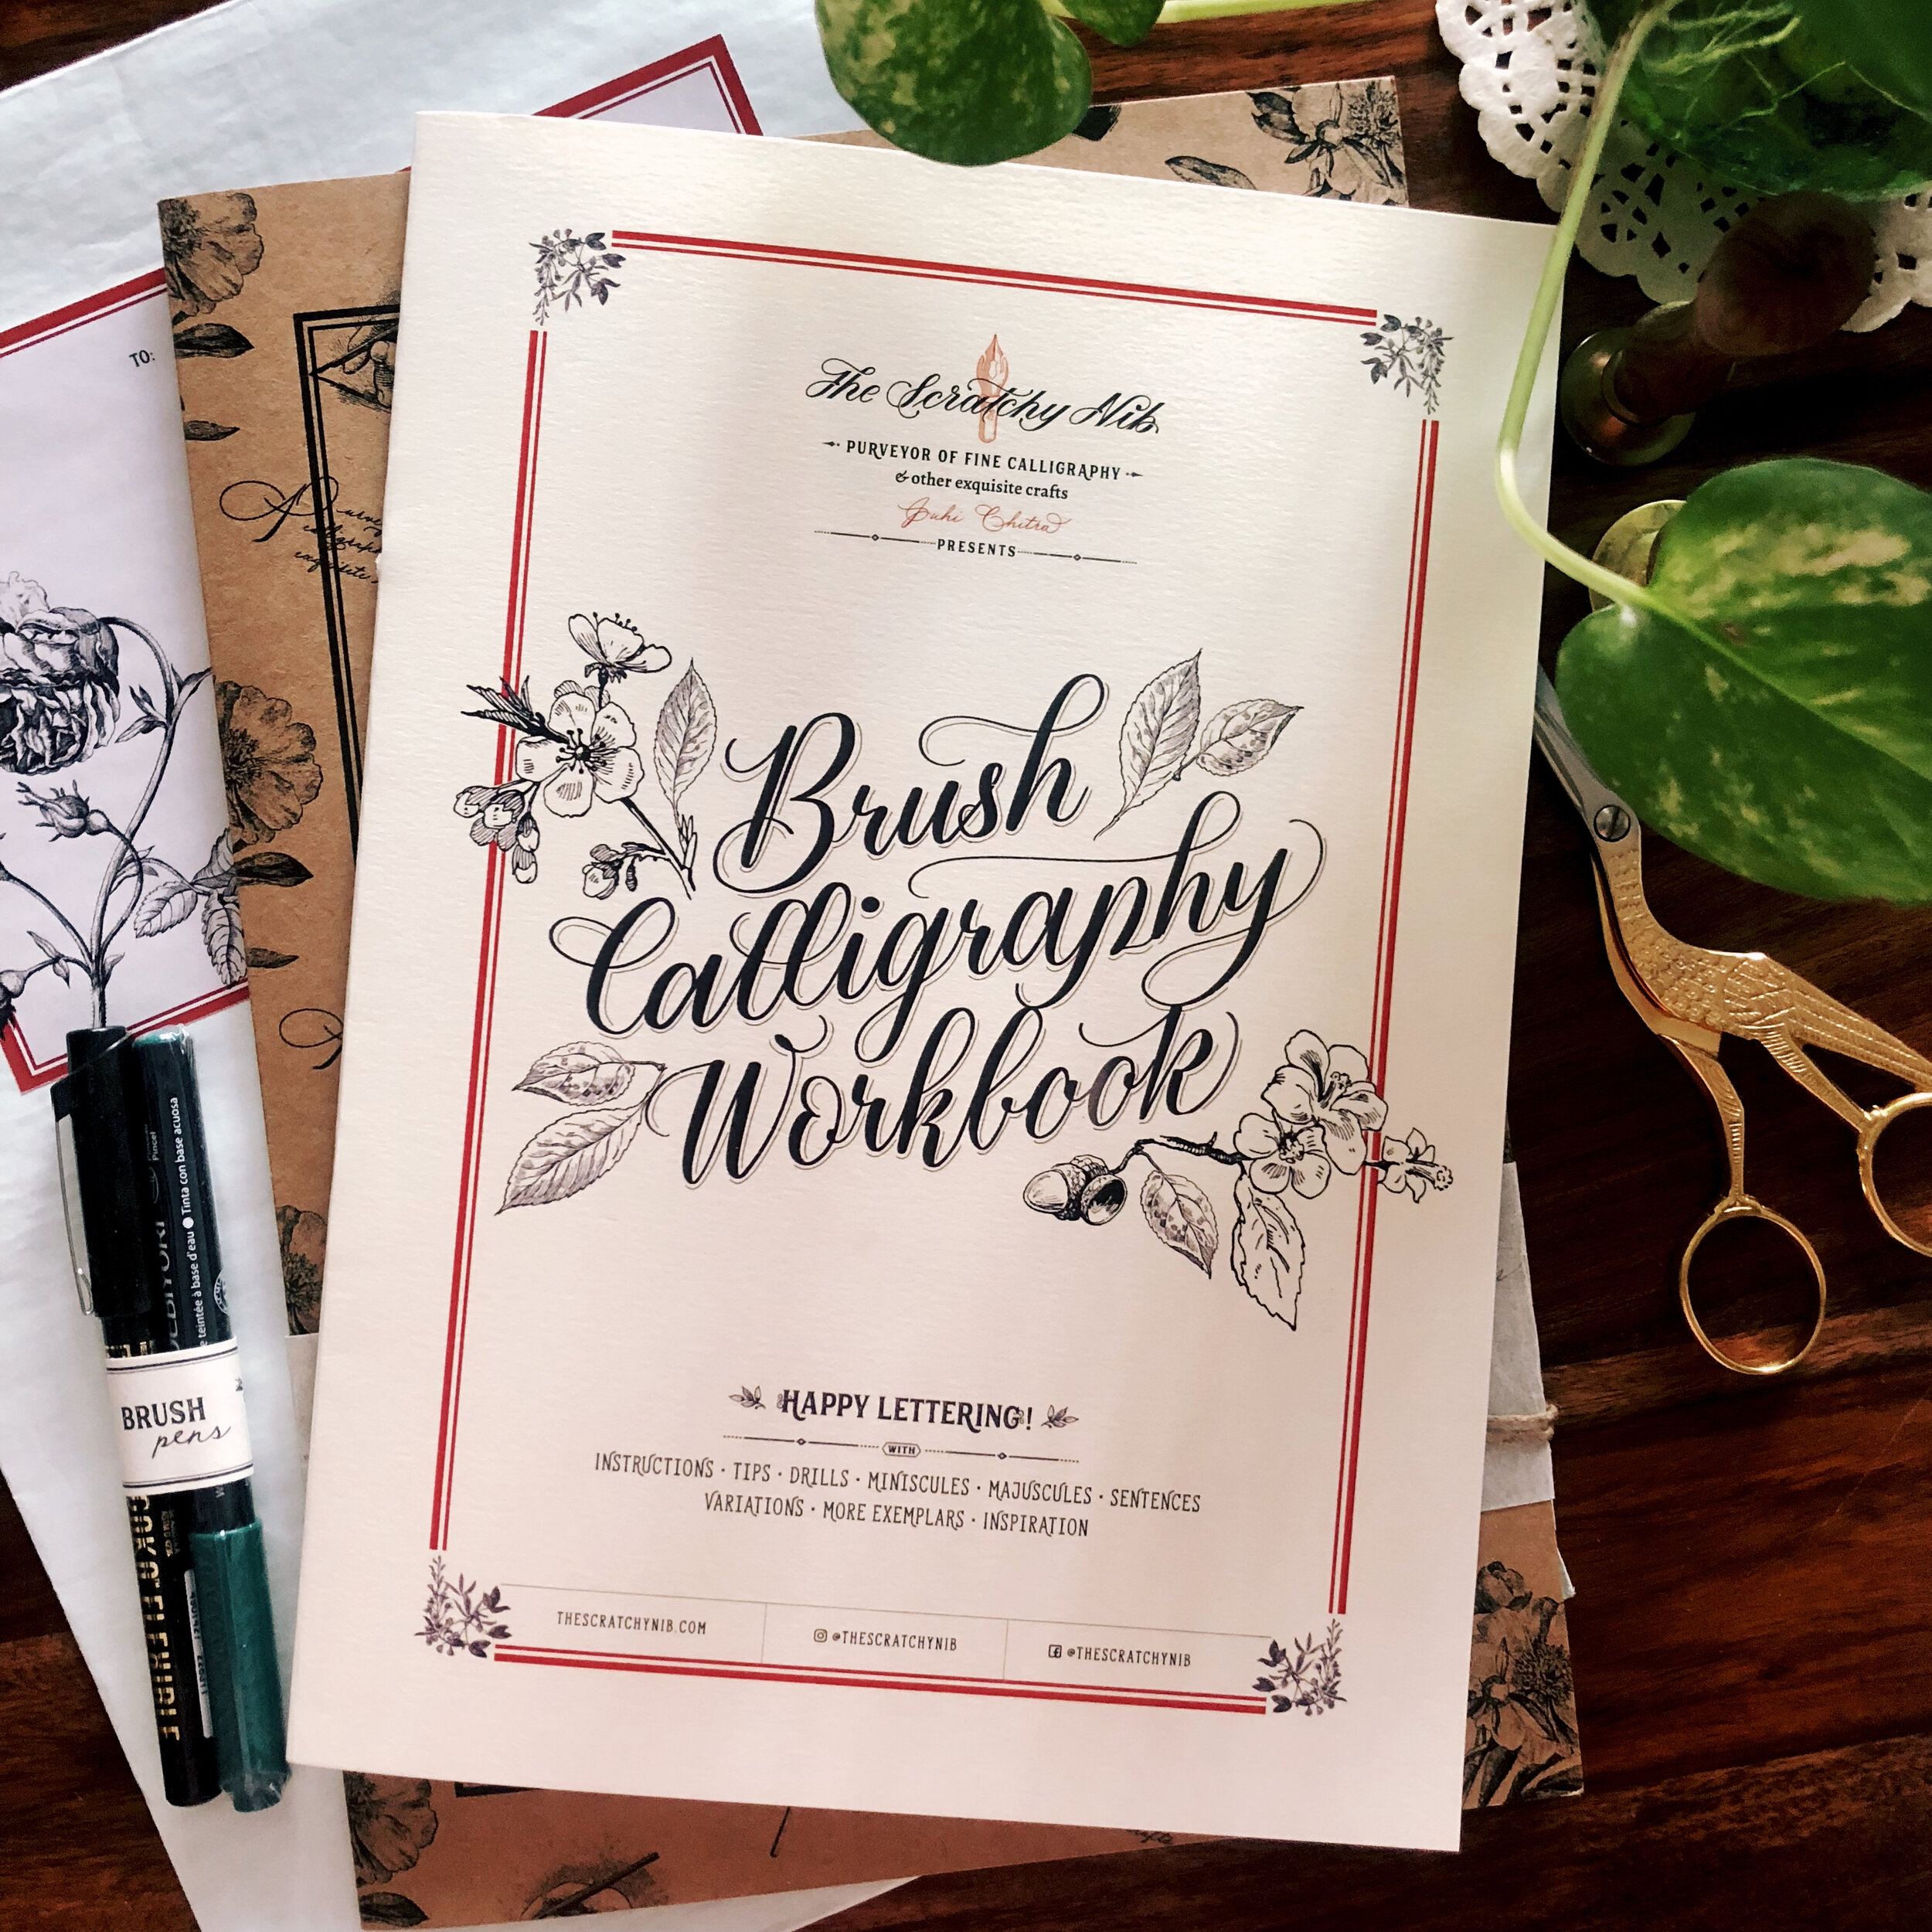 Learn  Pieces Calligraphy